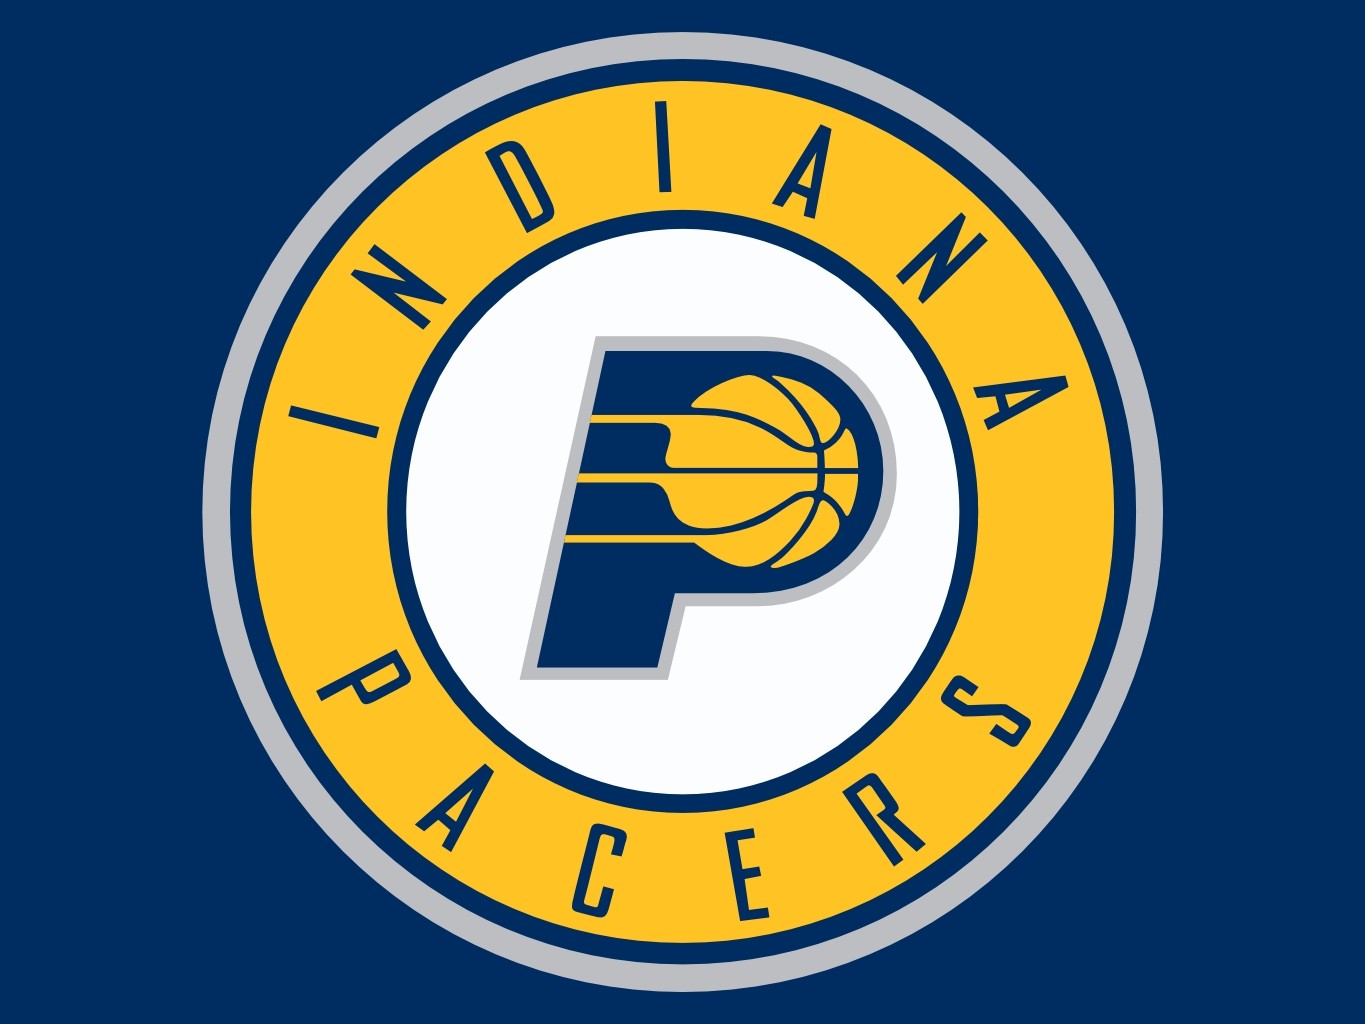 NBA, Basketball, Indiana Pacers, Paul George, Sports Wallpaper